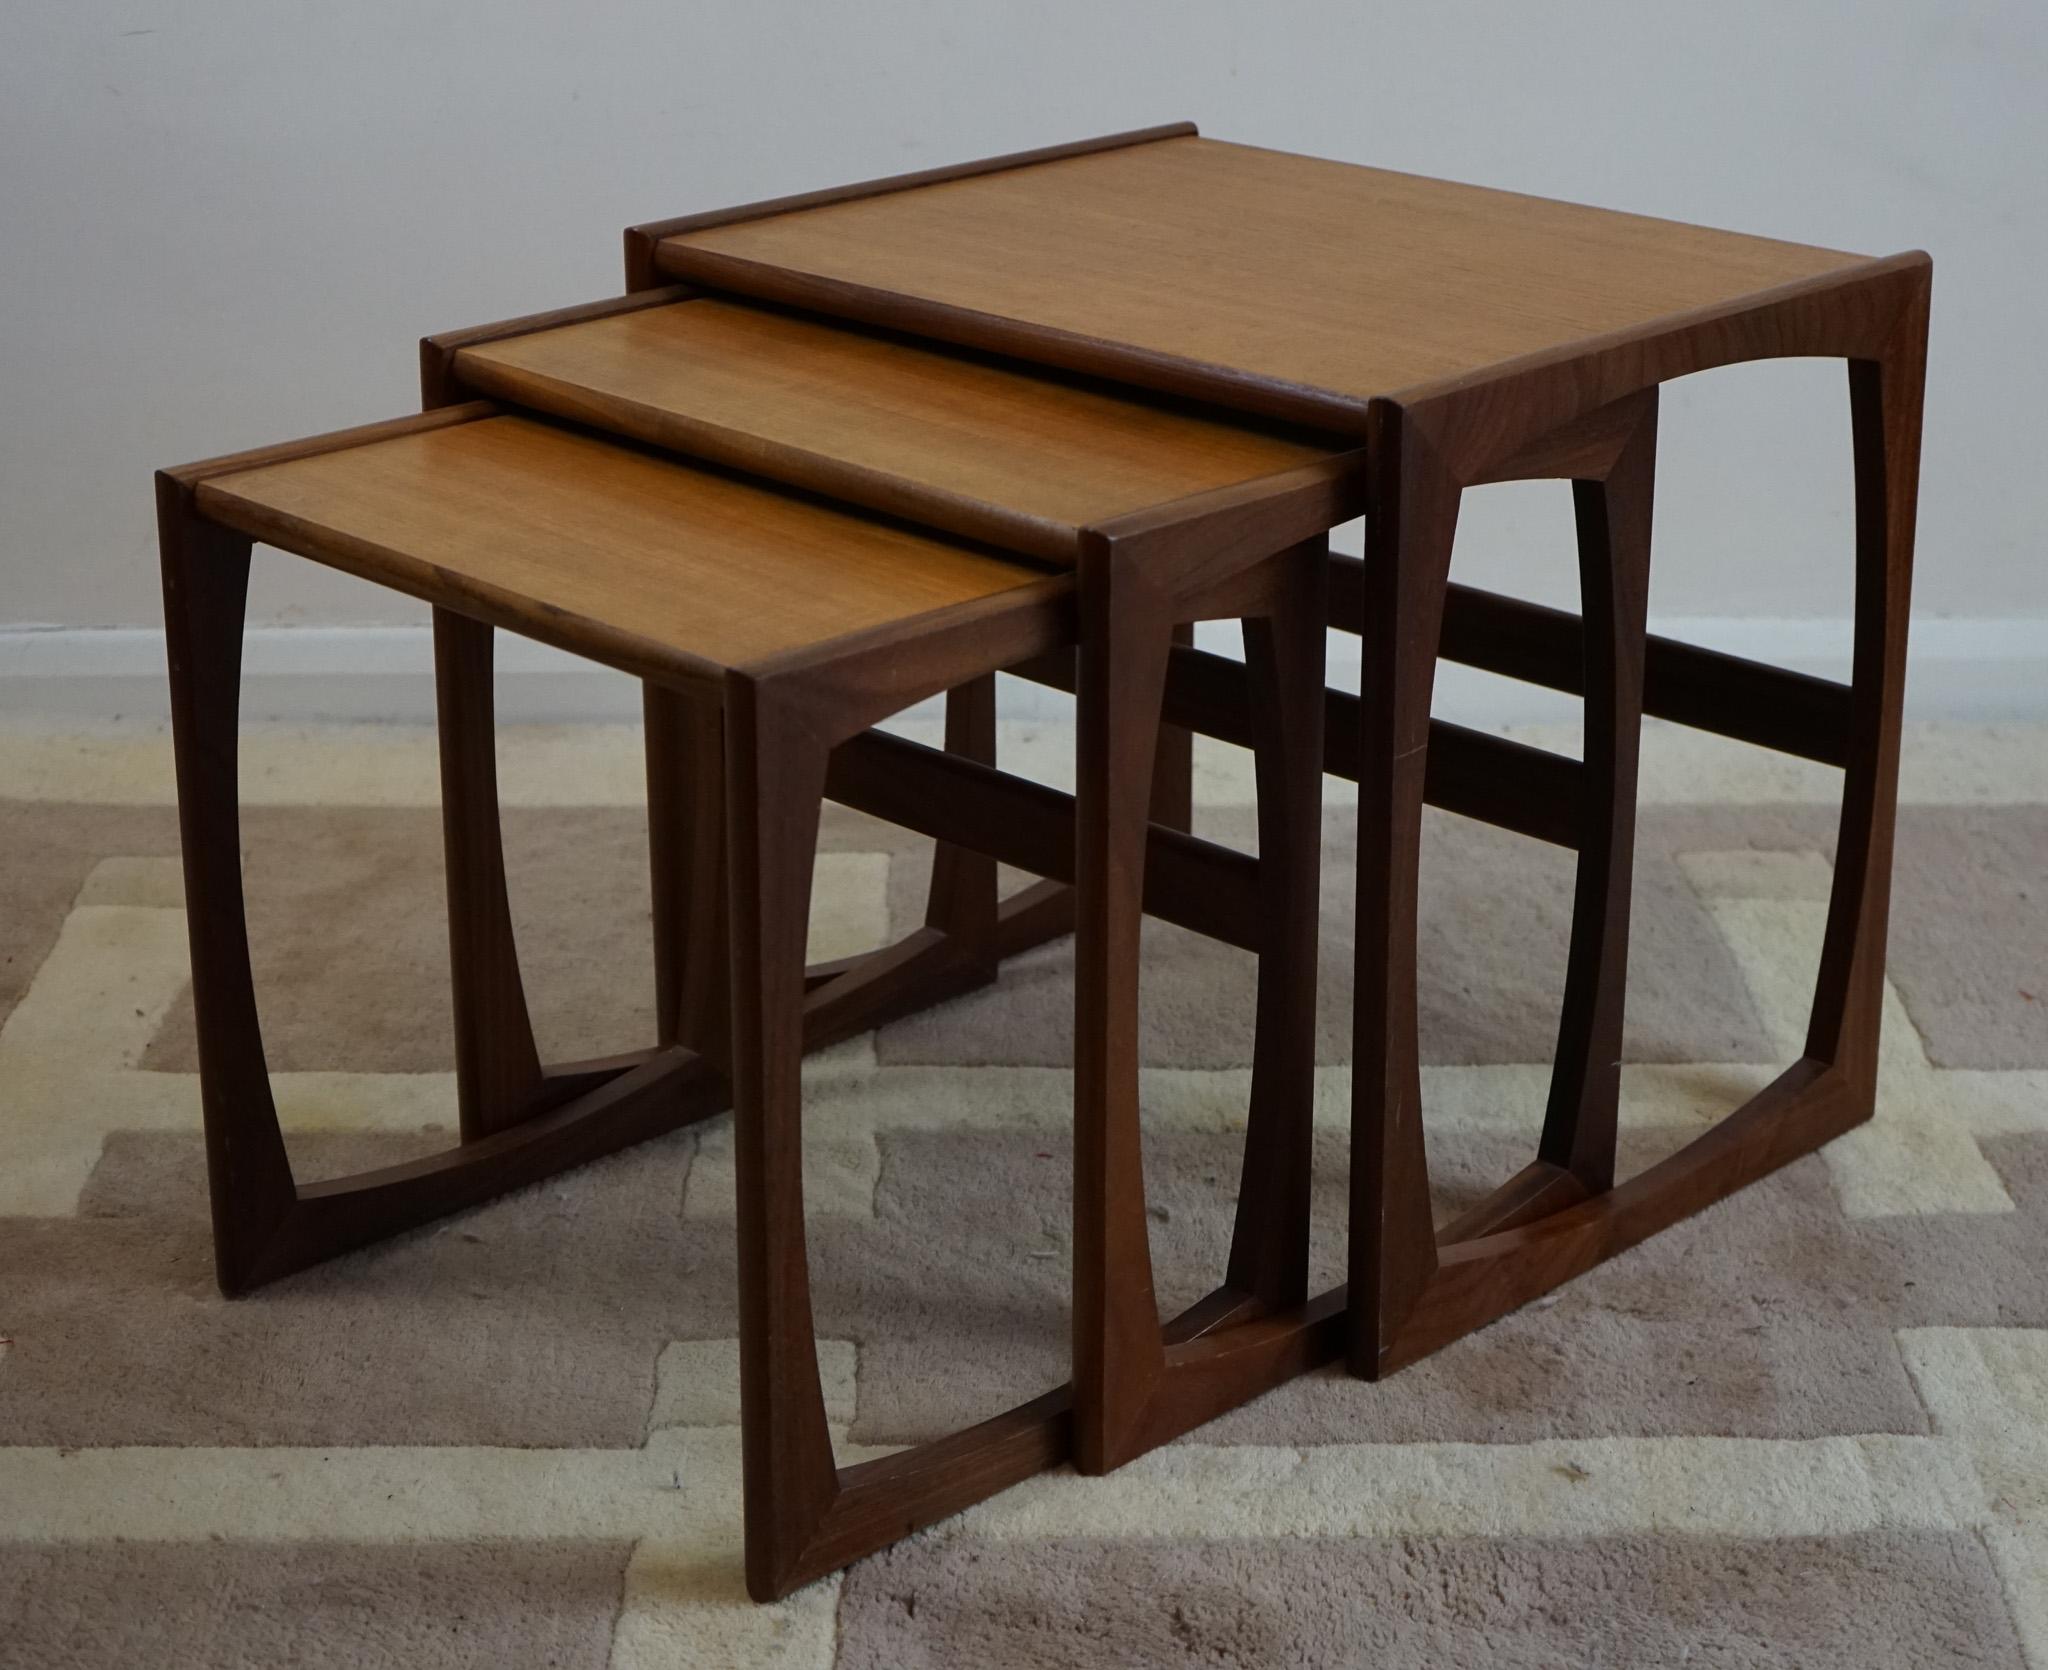 A G Plan Teak Nest Of Three Occasional Tables.


Three's a charm. A beautiful set of nesting tables / mimiset in beautiful teak. Particularly by the wood joints of the legs and the tight minimalist design. Country: United Kingdom. G-plan is known